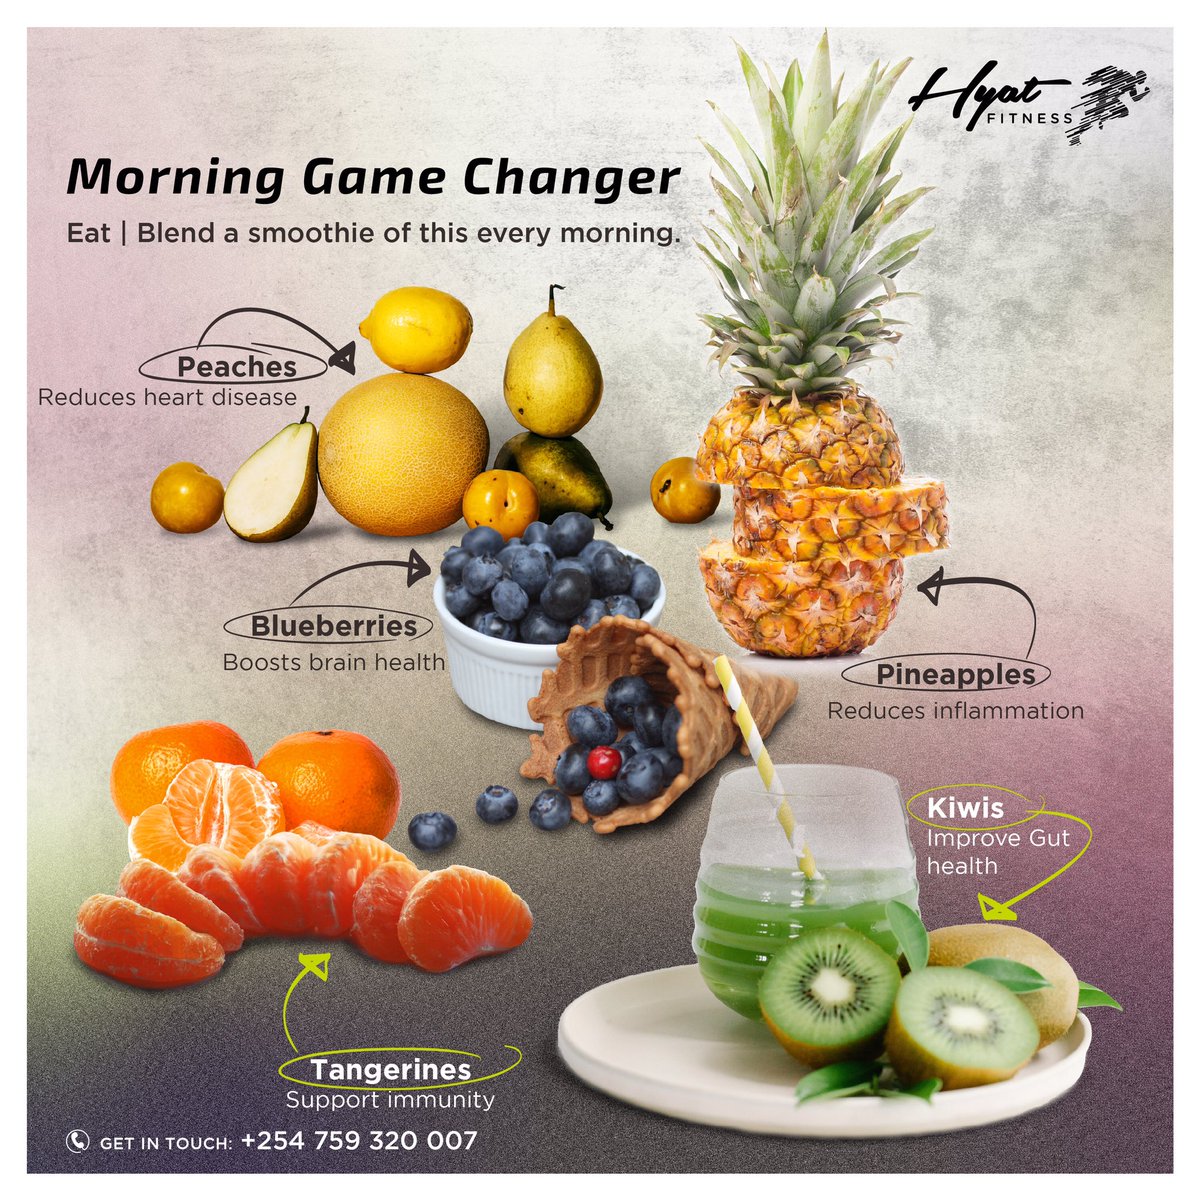 Morning fruits are mandatory over here. Incorporating tangerines, blueberries, pineapples, kiwis, and peaches into your morning routines.
#smoothie #fruitfulness #hydration #weightcontrol #healthylifestyle #healthyeating #healthyfood #smoothie recipe #granola #gym